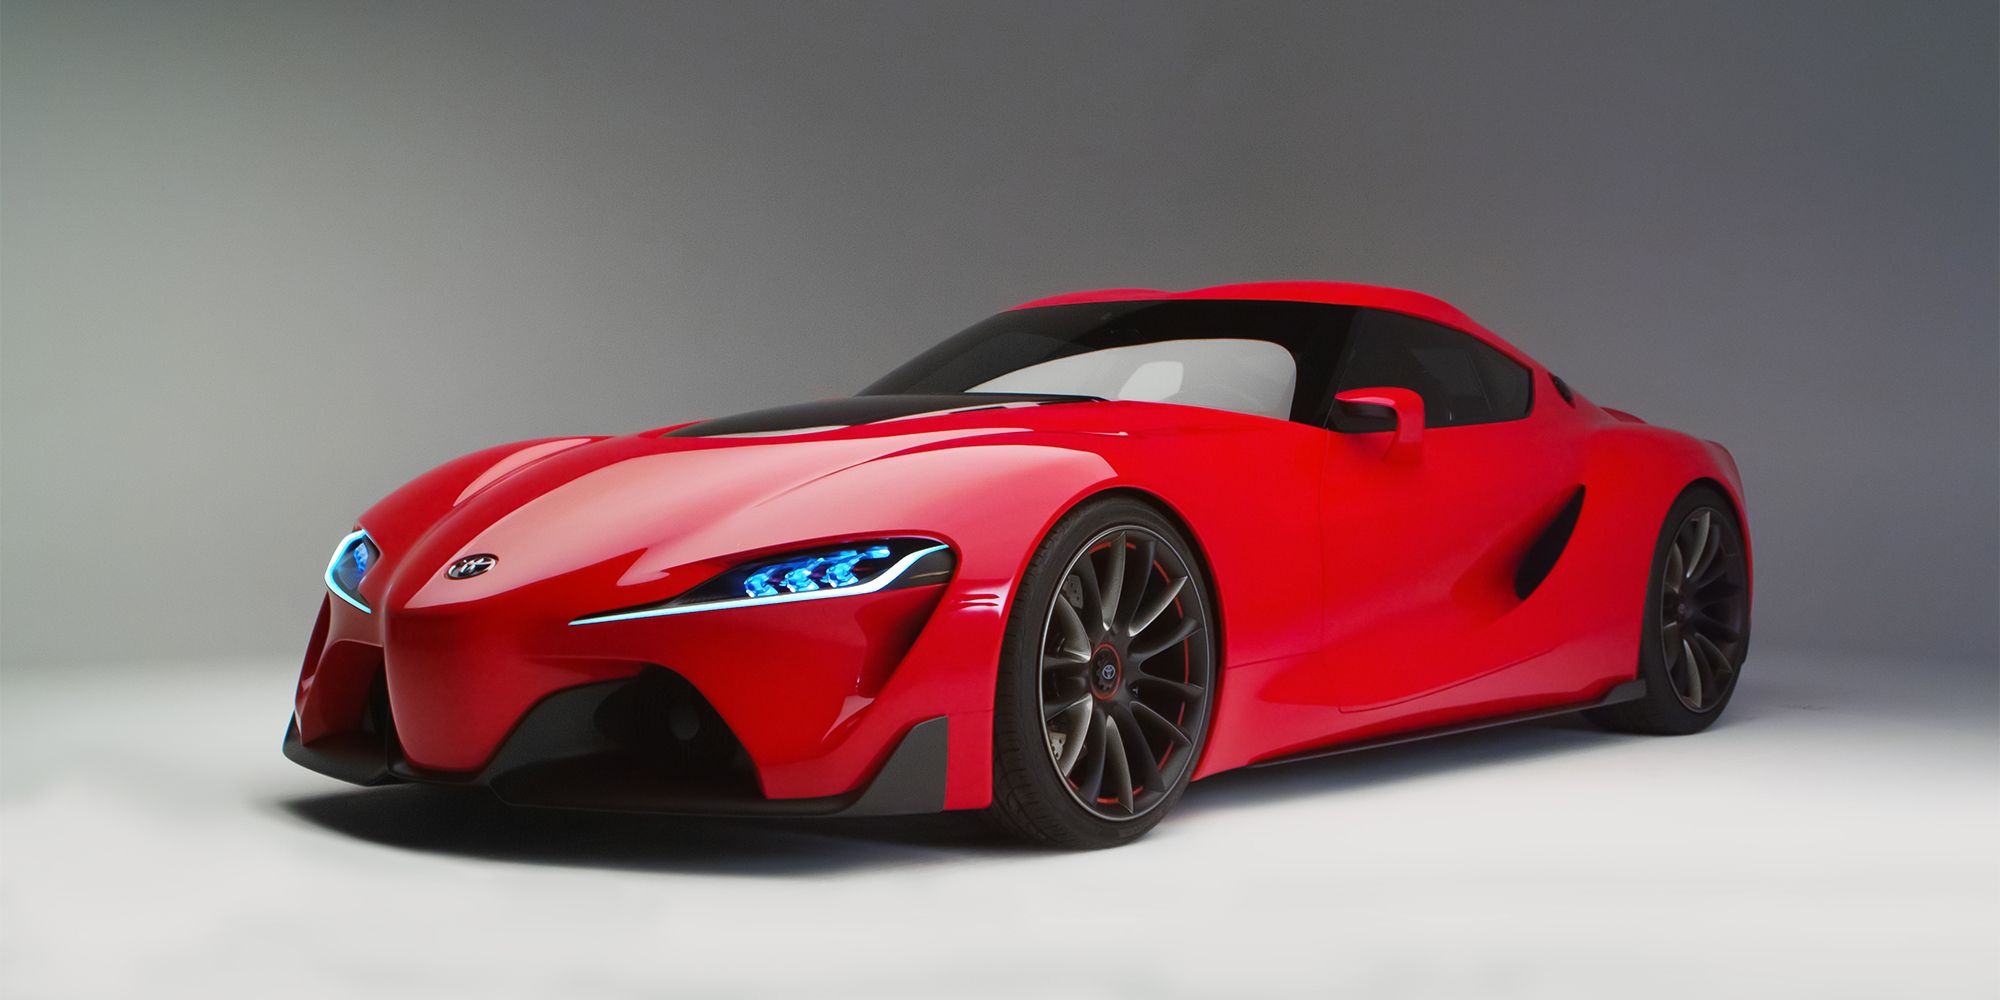 The front of the Toyota FT-1 Concept